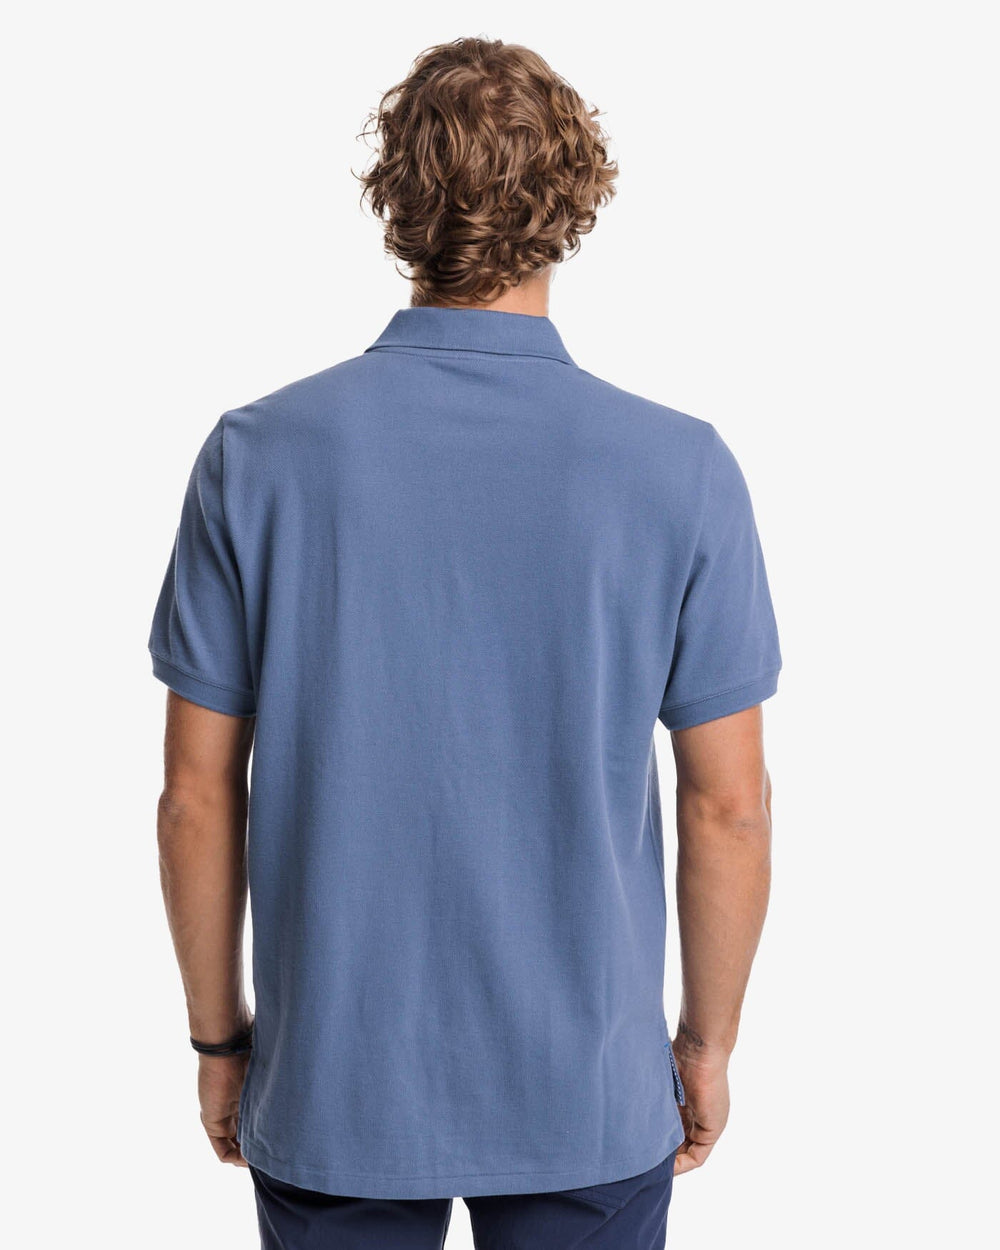 The back view of the Southern Tide New Skipjack Polo Shirt by Southern Tide - Blue Haze